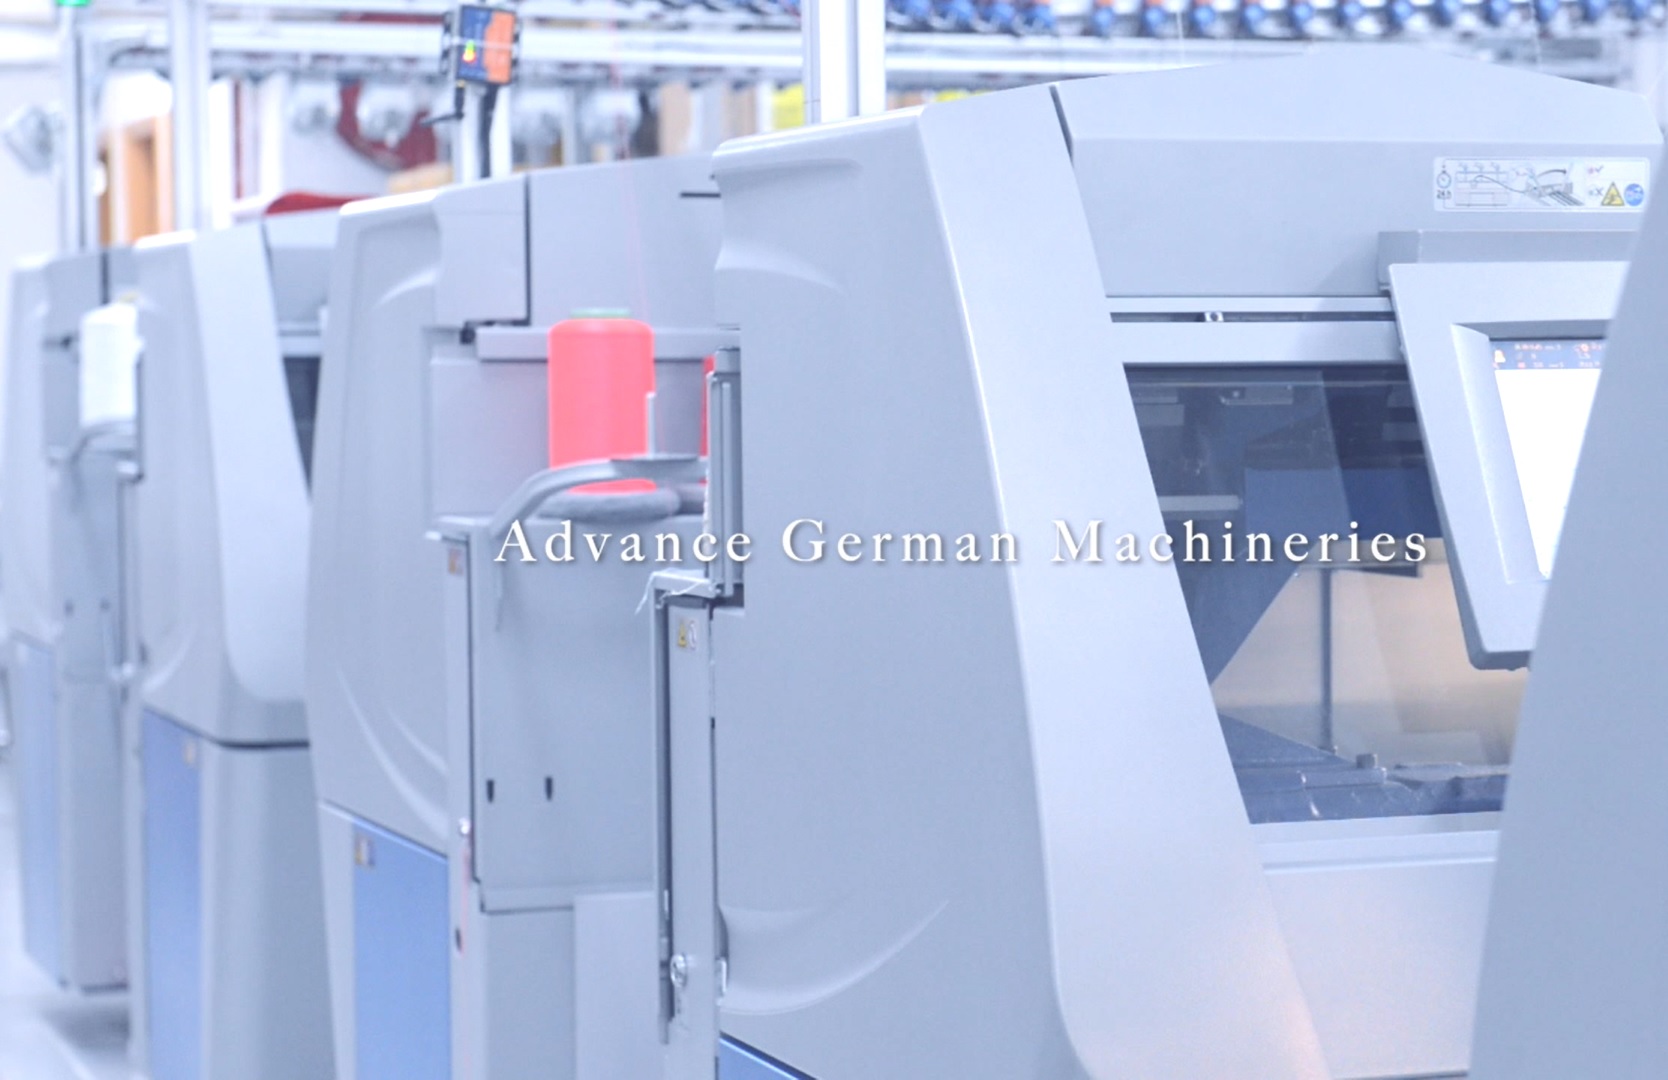 KNITnWEAR is equipped with machinery that meets the highest standards and triggers innovation.